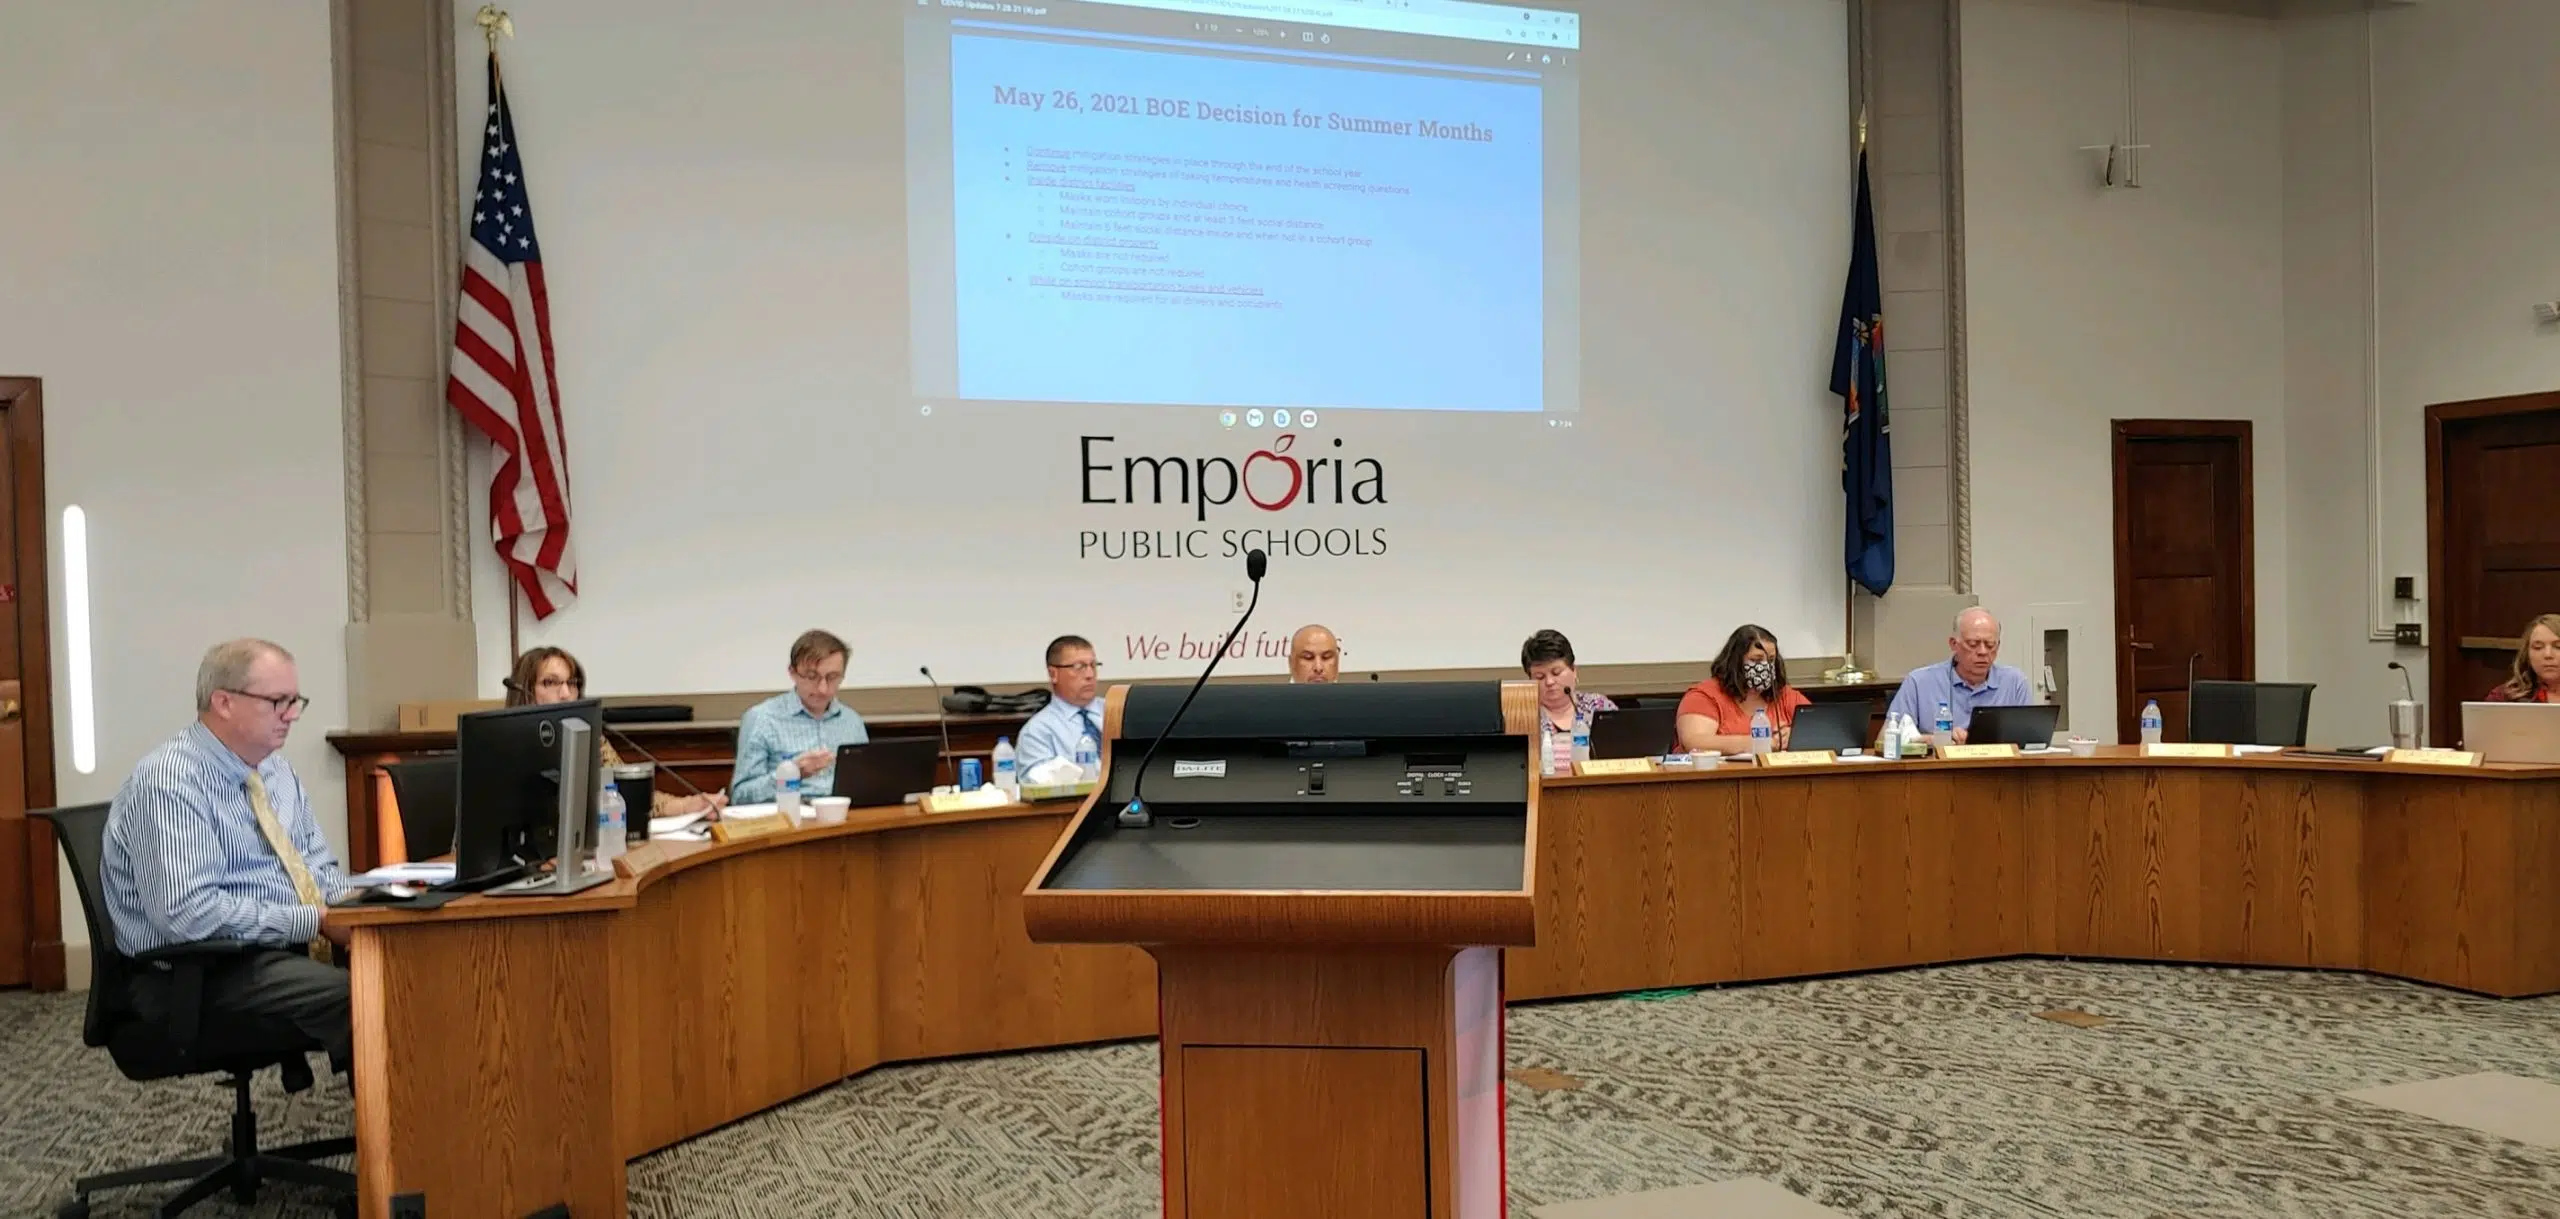 USD 253 Board approves mitigation policies for coming school year